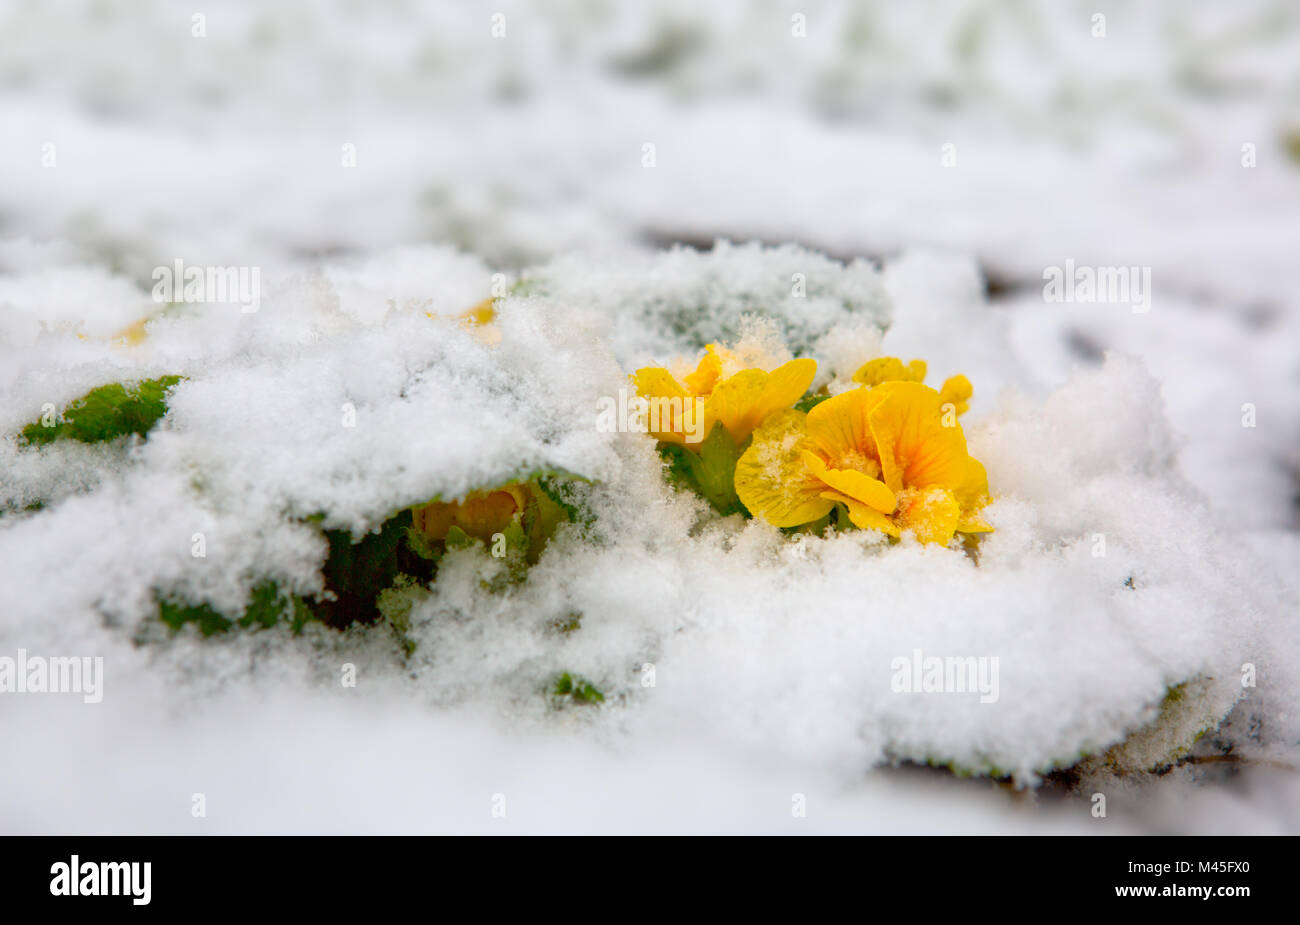 Yellow primrose flower growing from the snow. Stock Photo